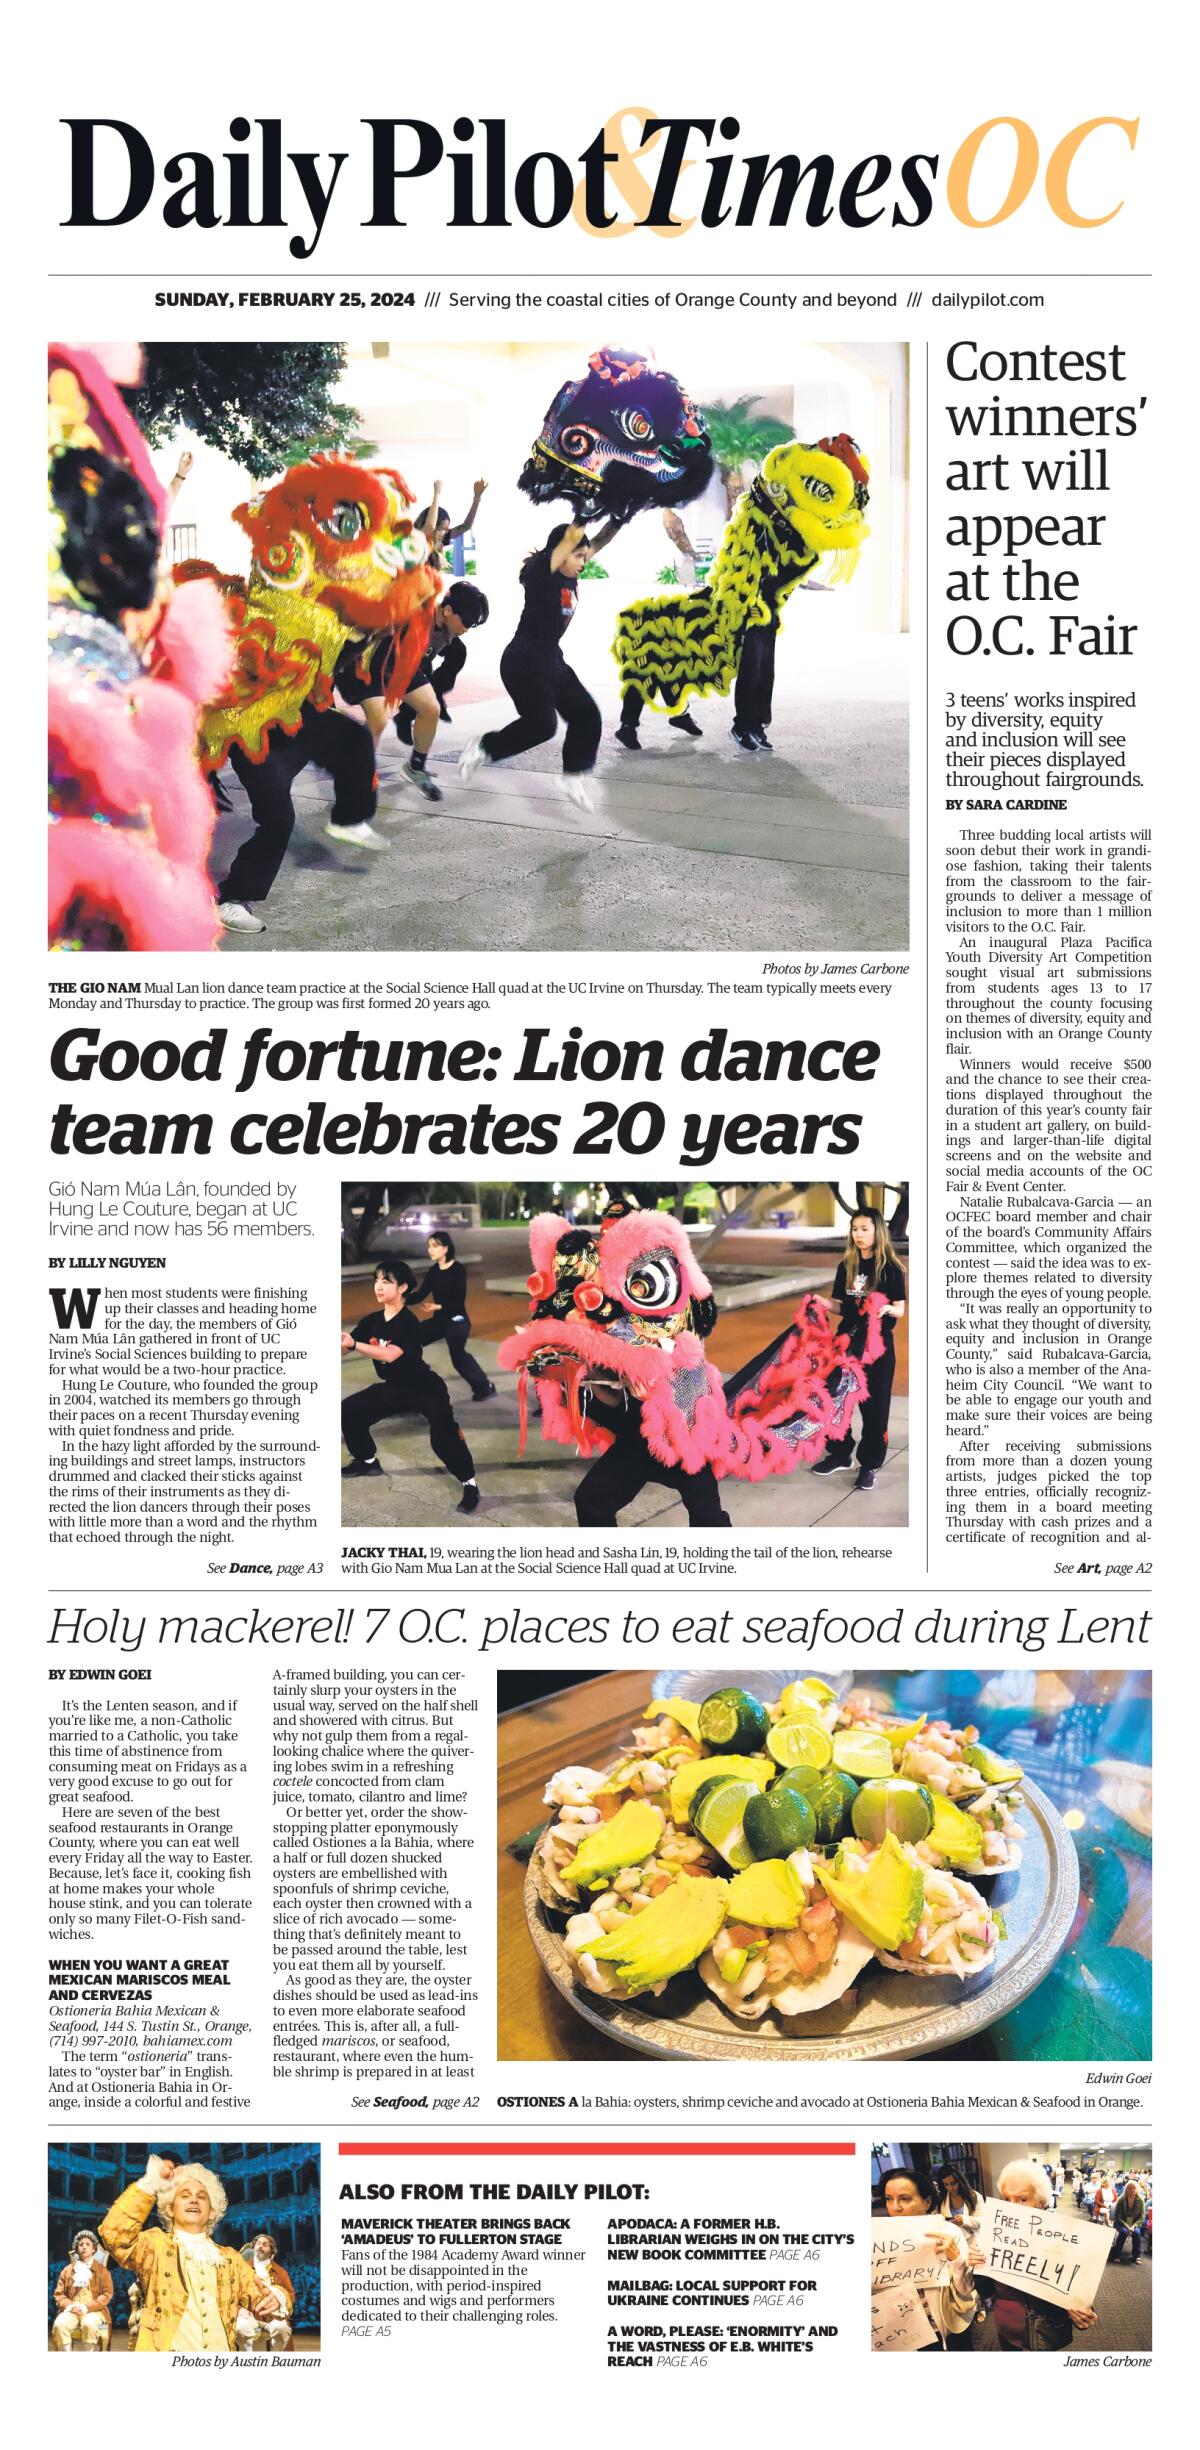 Front page of the Daily Pilot & TimesOC e-newspaper for Sunday, Feb. 25, 2024.